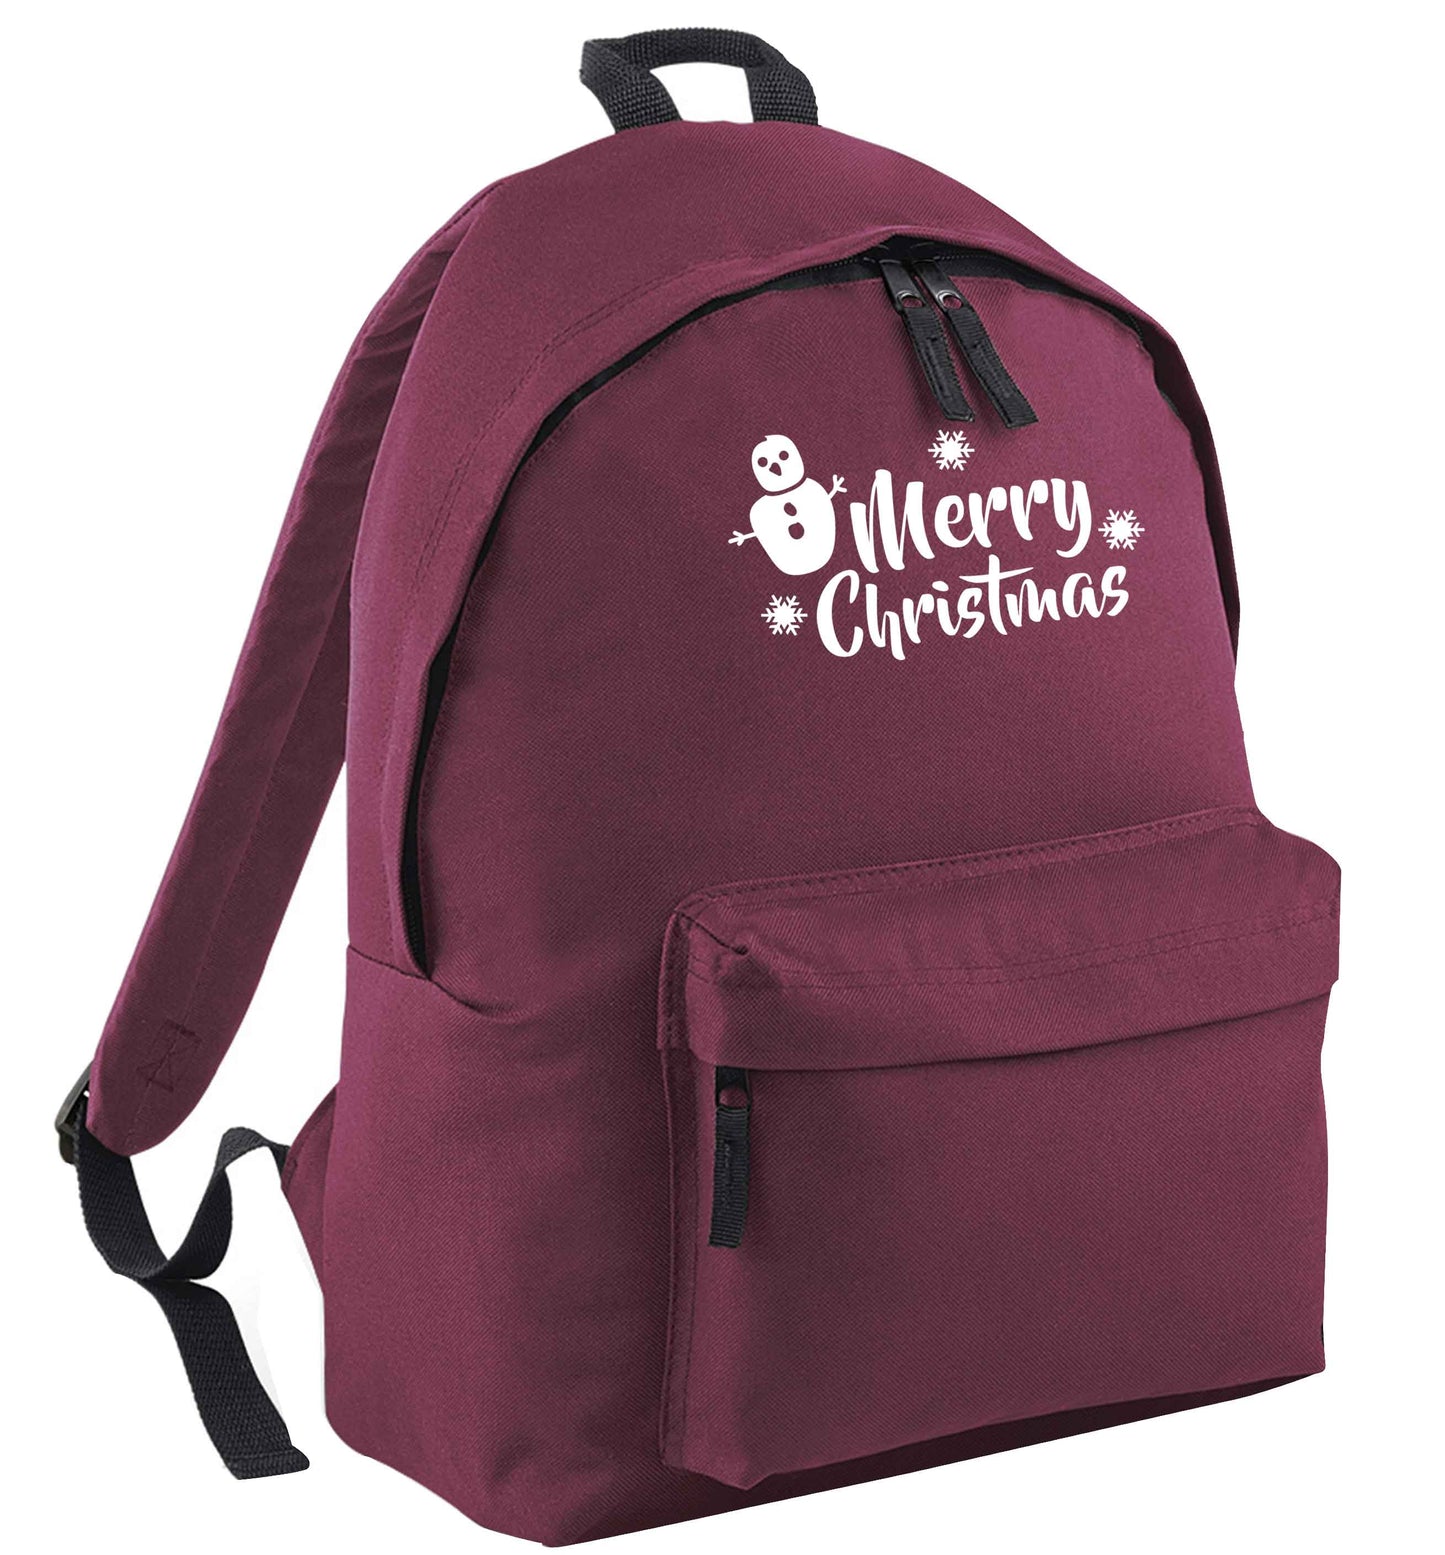 Merry Christmas - snowman maroon adults backpack